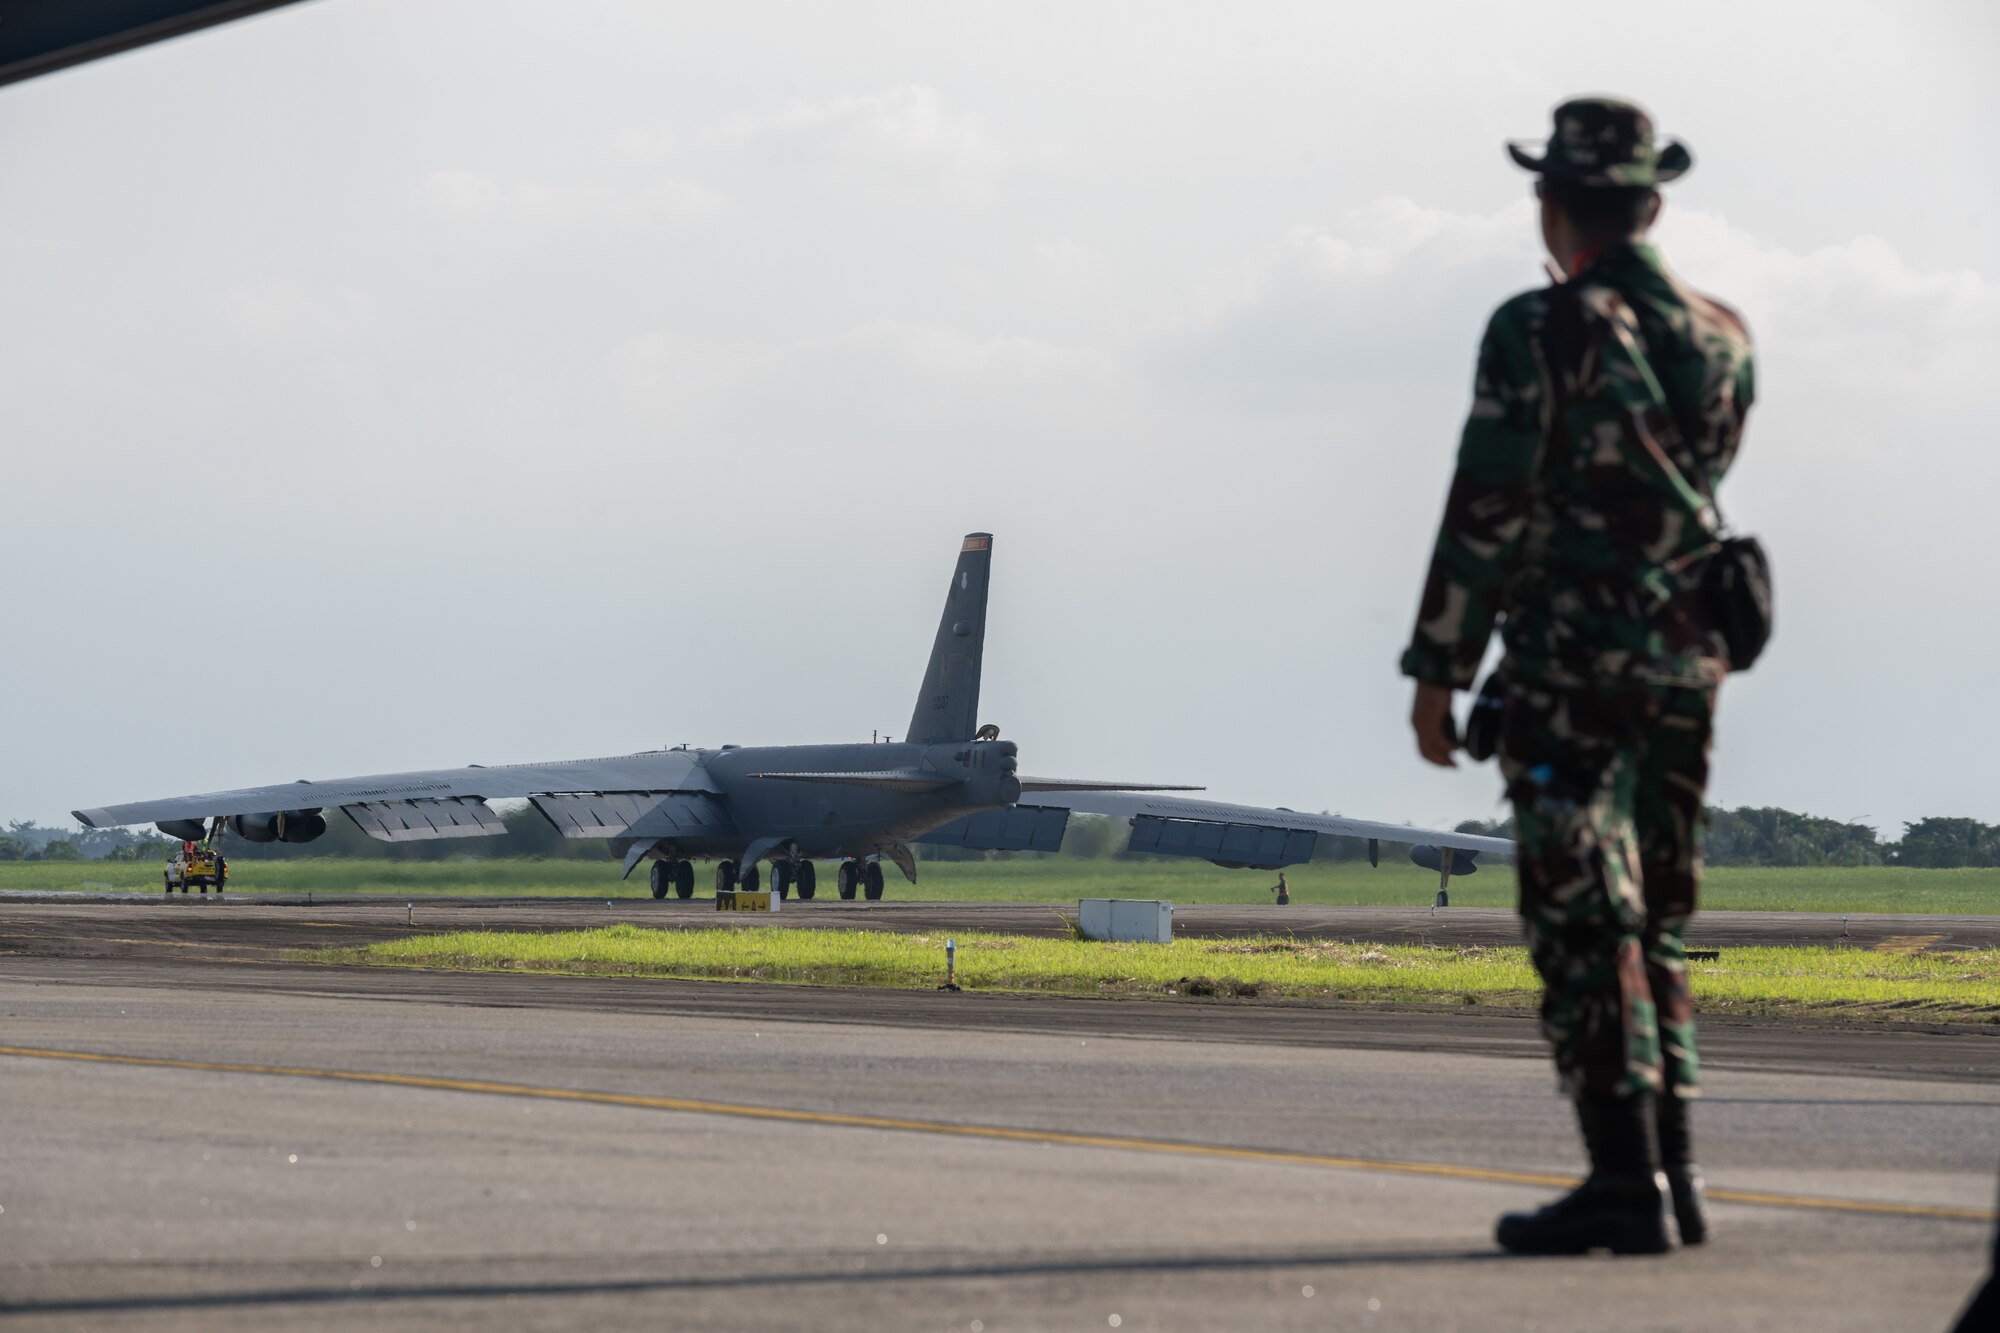 A member of the Tentara Nasional Indonesia Angkatan Udara, or Indonesian Air Force, watches as a U.S. Air Force B-52H Stratofortress assigned to the 23rd Bomb Squadron at Minot Air Force Base, North Dakota, taxis on the runway upon landing at the Kualanamu International Airport in Medan, Indonesia, June 19, 2023. Two B-52s arrived in Indonesia to participate in bilateral training exercises, marking the first time U.S. Air Force B-52s had landed on Indonesian soil. (U.S. Air Force photo by Tech. Sgt. Zade Vadnais)